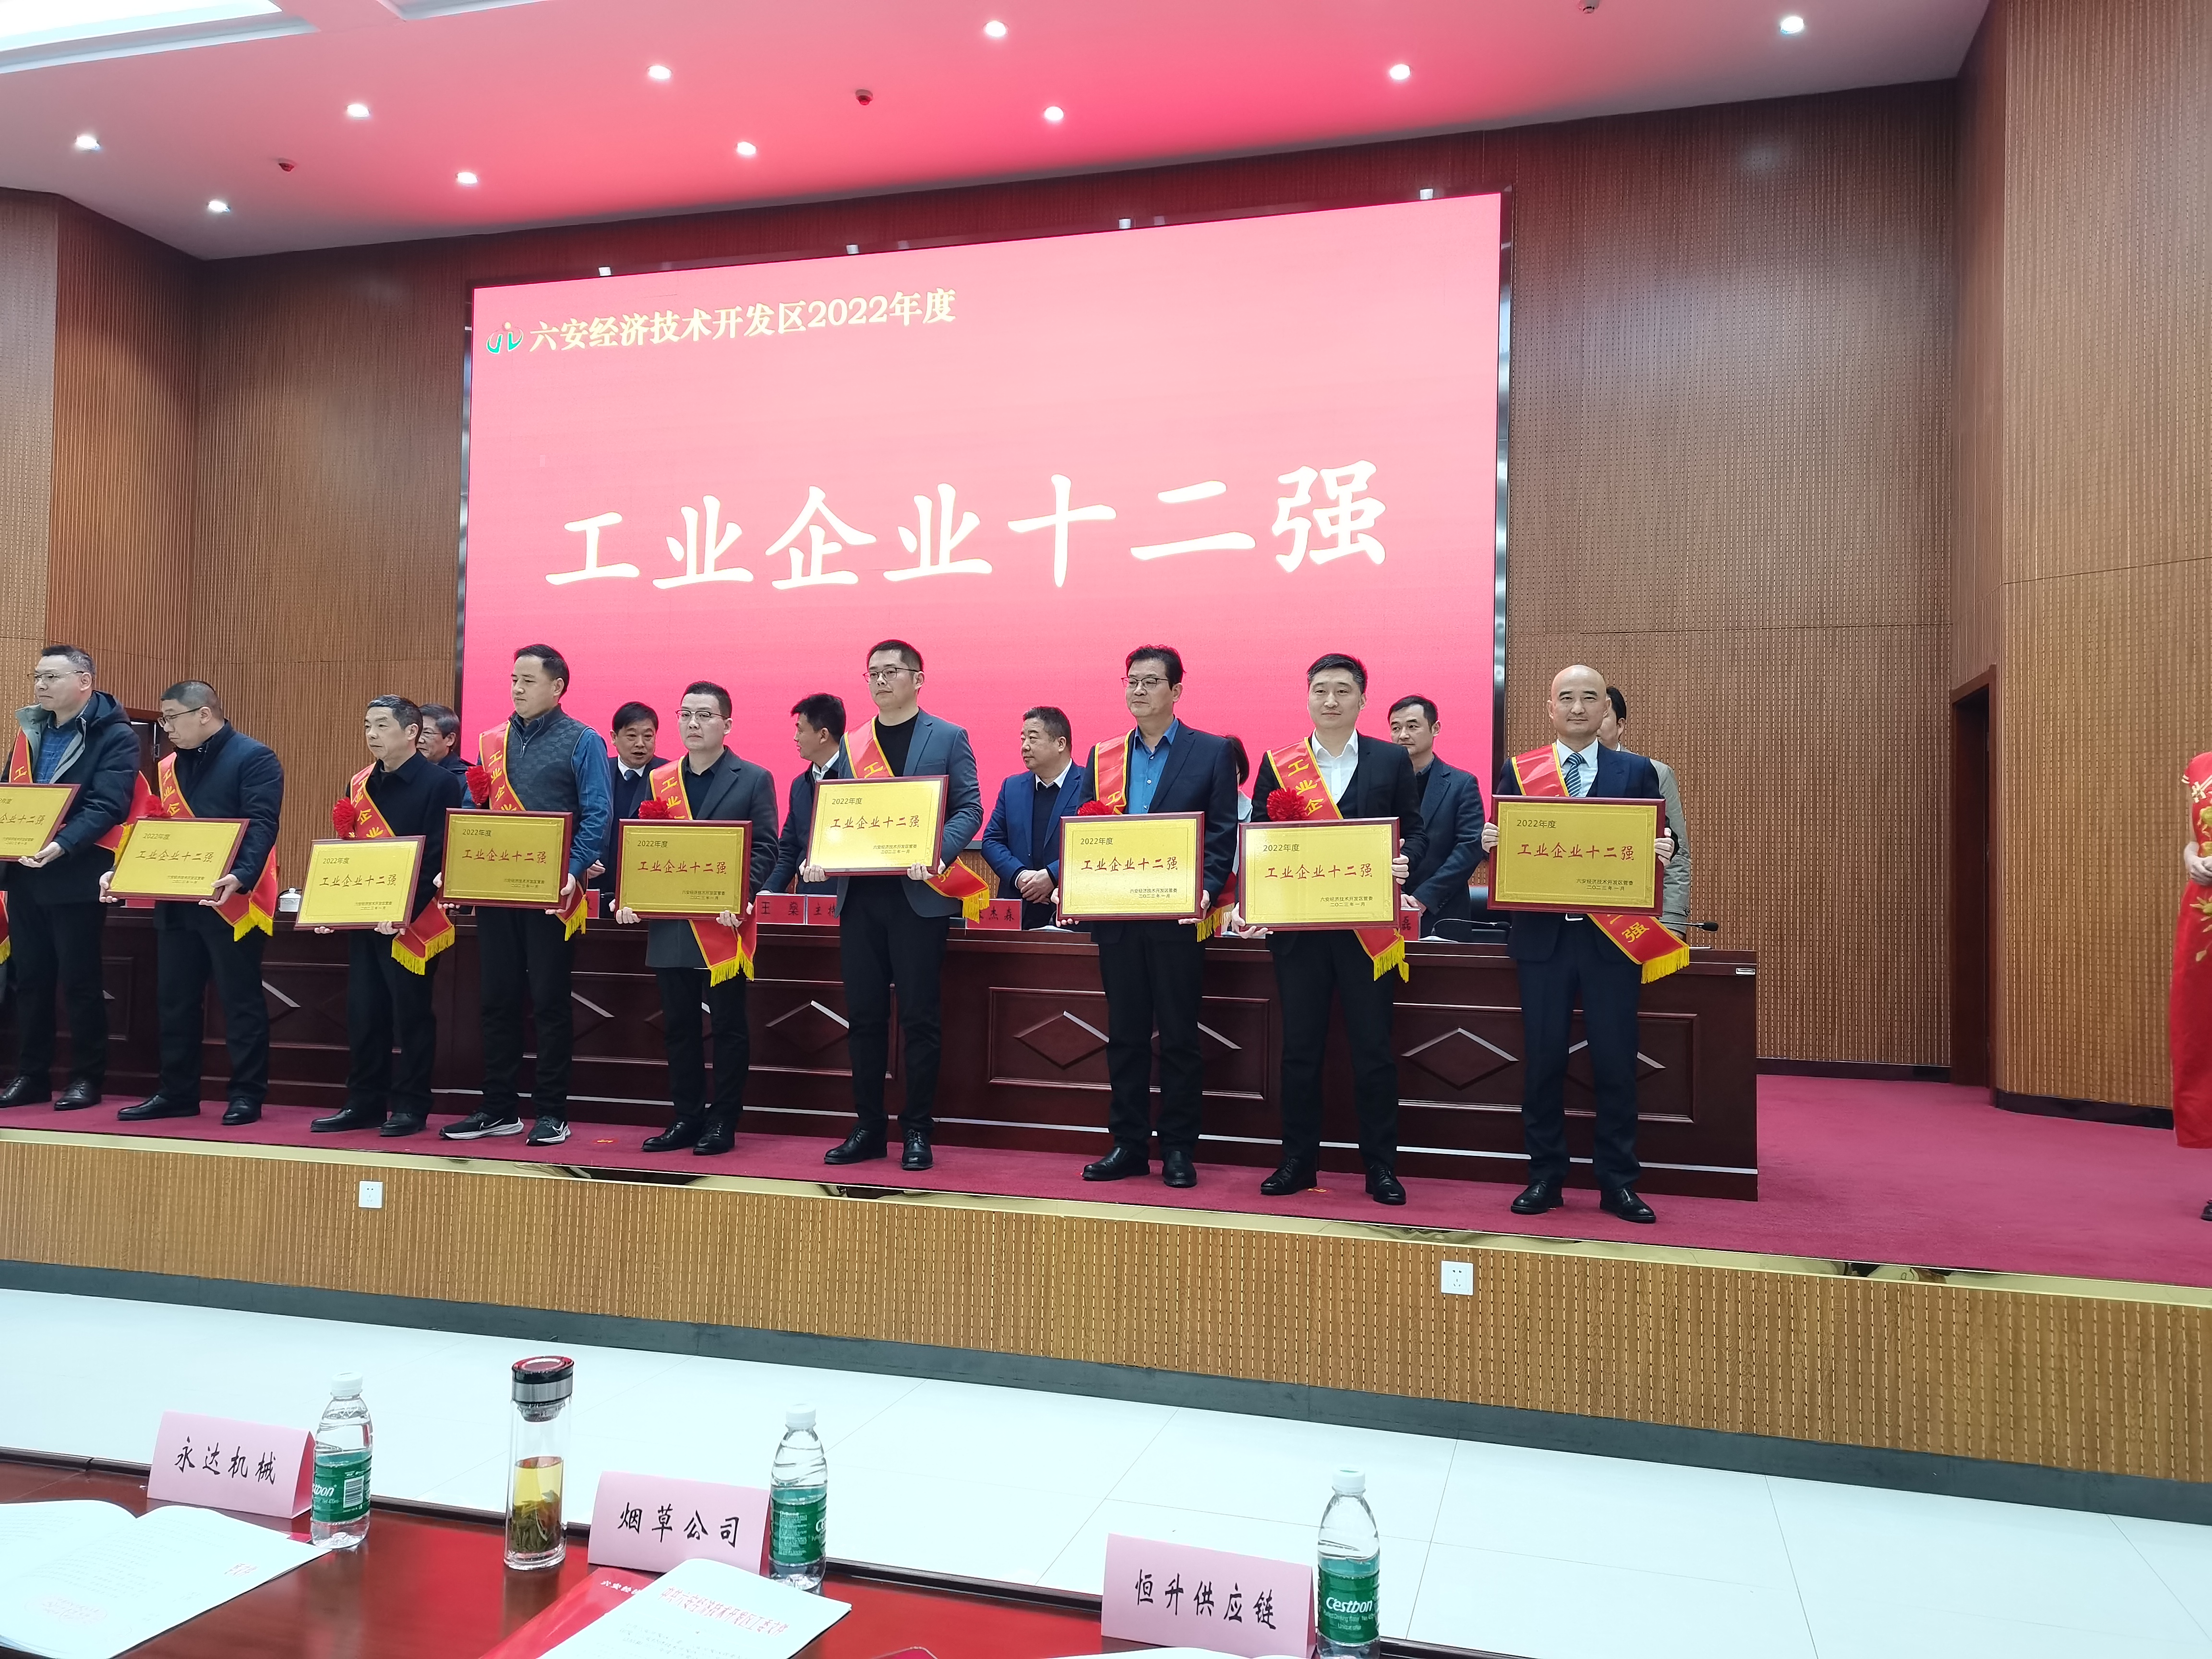 Good news ▏The Company Won the "Top 12 Industrial Enterprises" in Lu'an Development Zone in 2022  